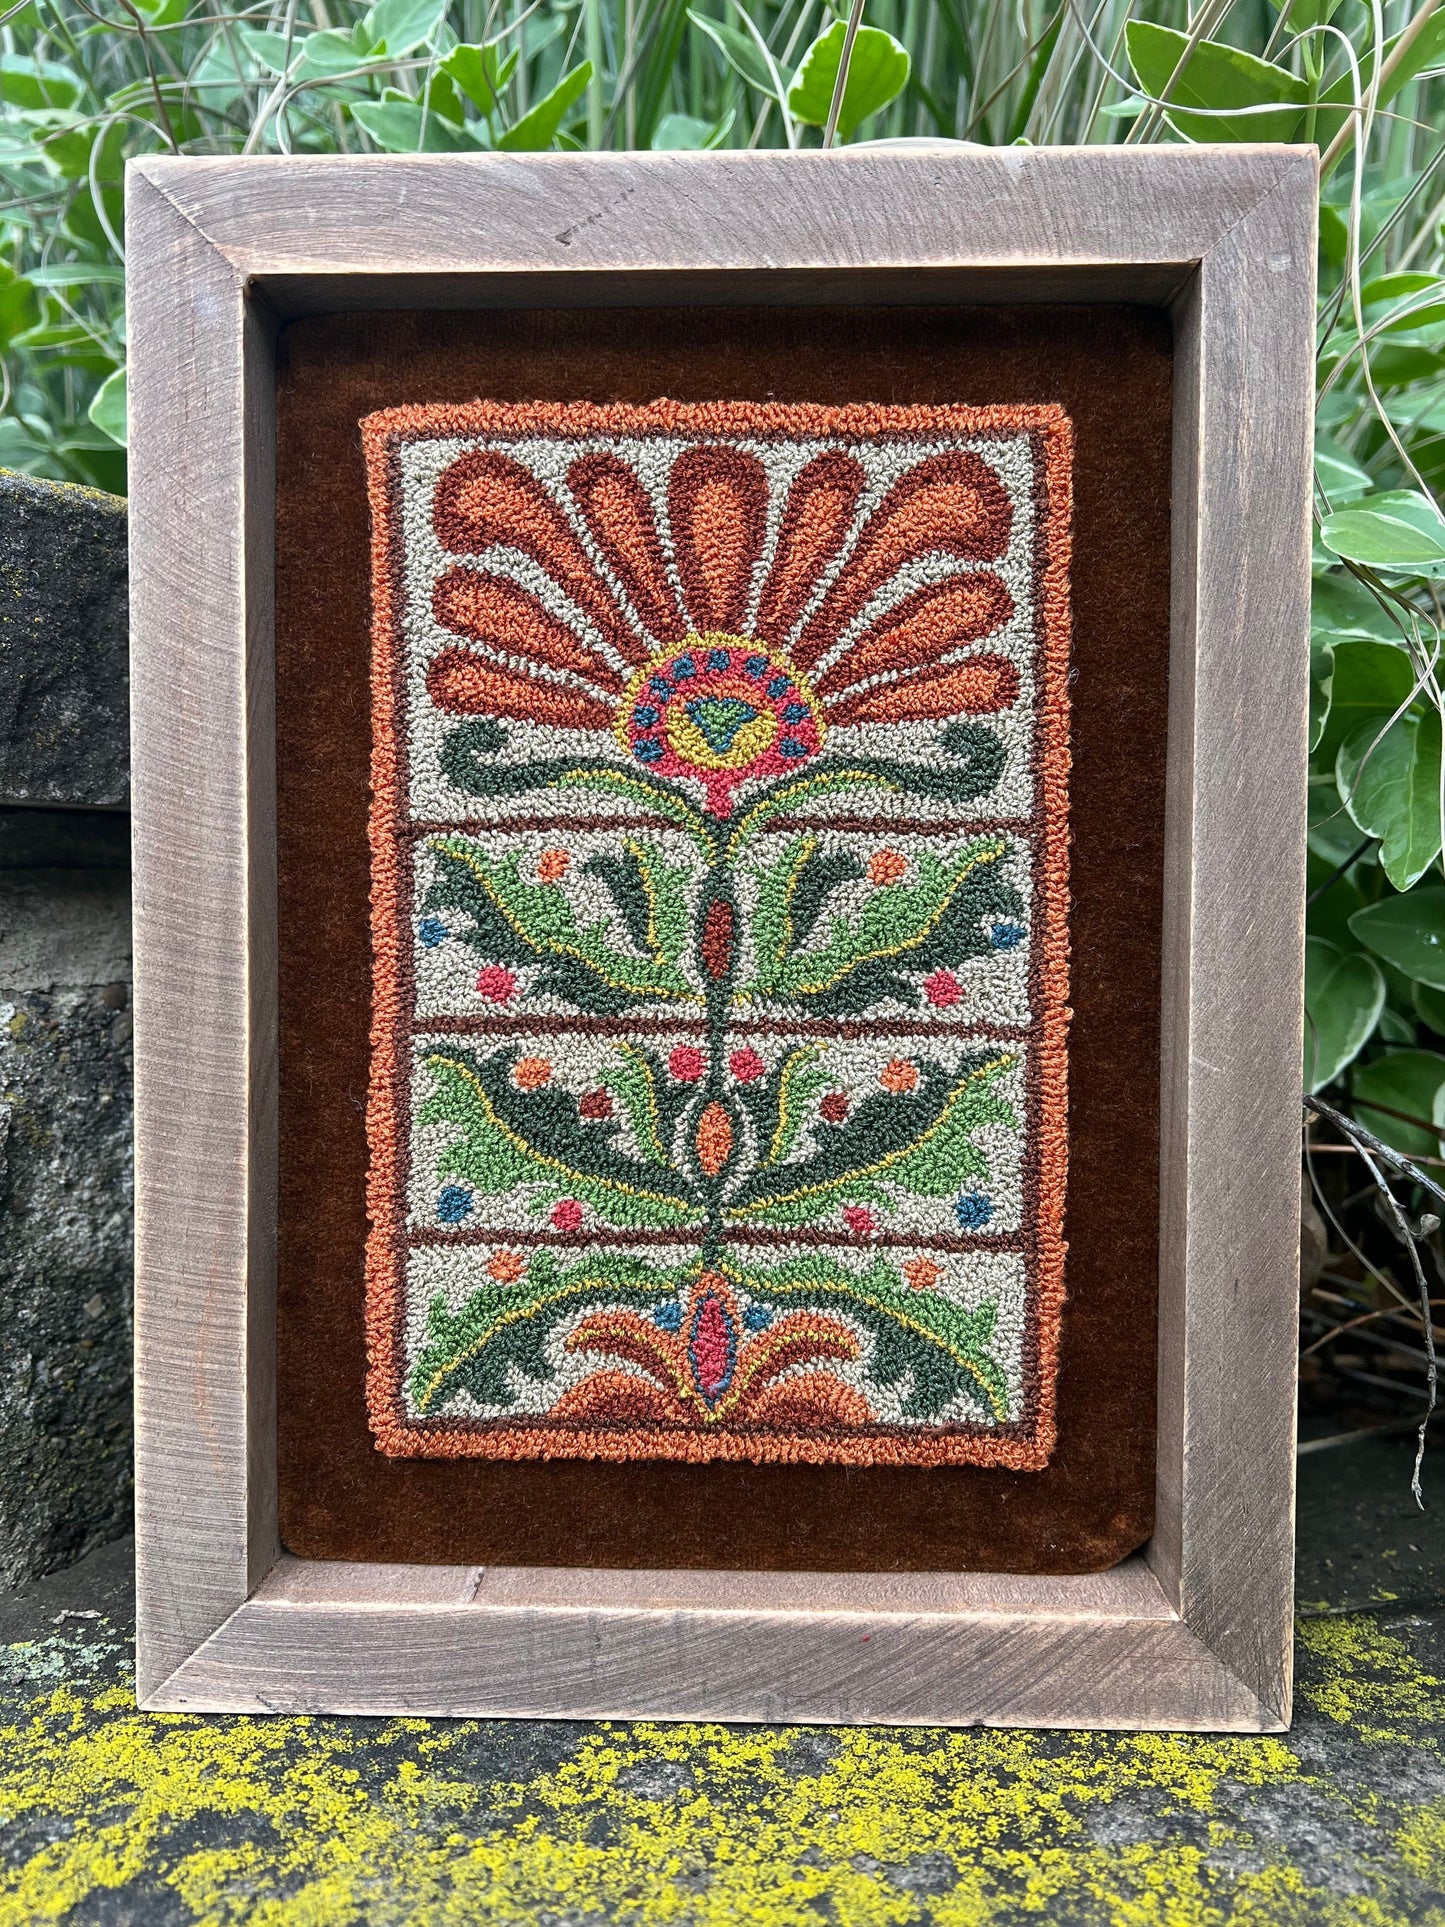 Autumn's Gift is a Punch Needle Embroidery Pattern designed by Orphaned Wool. This is a wonderful Fall Floral design to enjoy creating with DMC floss threads. Copyright 2023 Kelly Kanyok / Orphaned Wool.